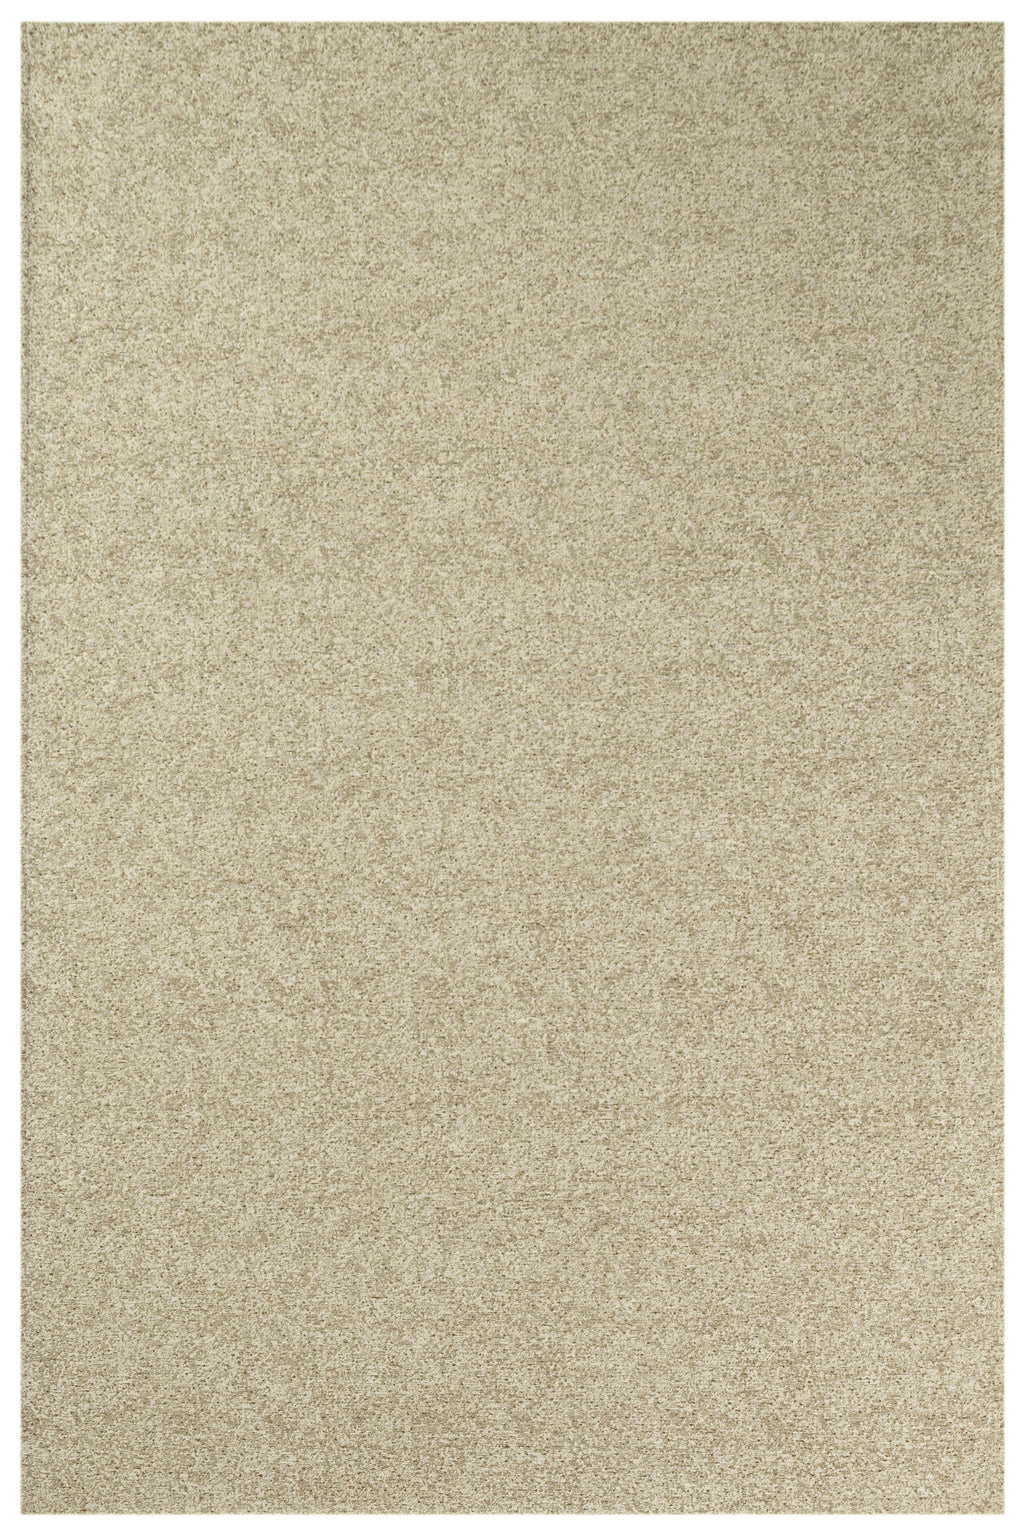 TAPIS - COLLECTION MIST BENEFFITO